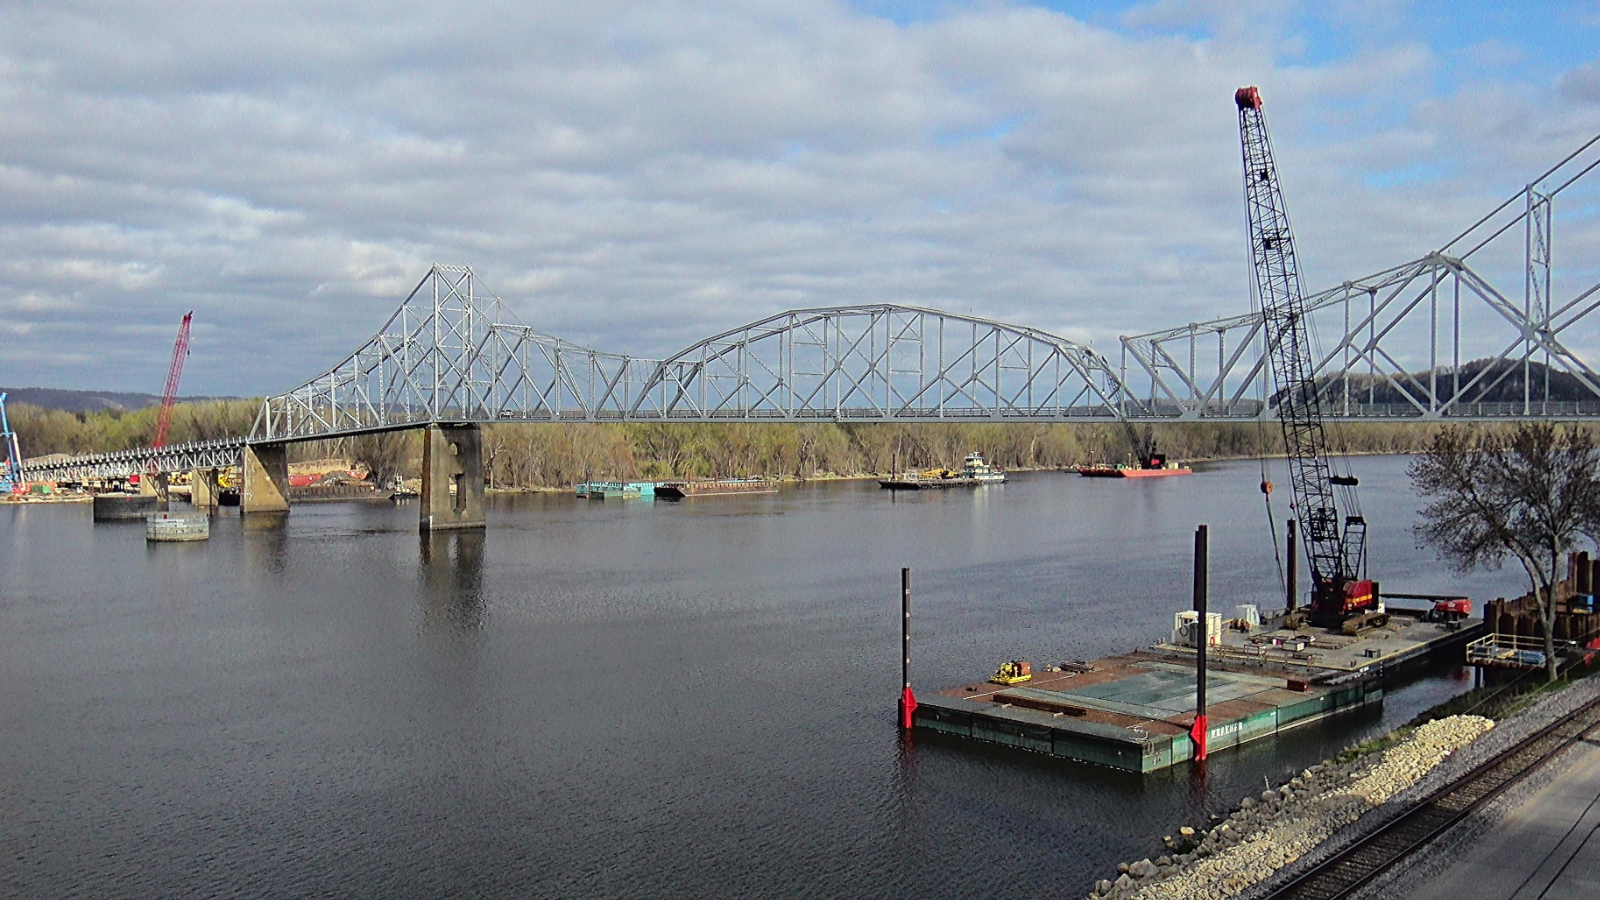 Lansing Bridge reopens after being closed nearly 2 months for emergency repairs